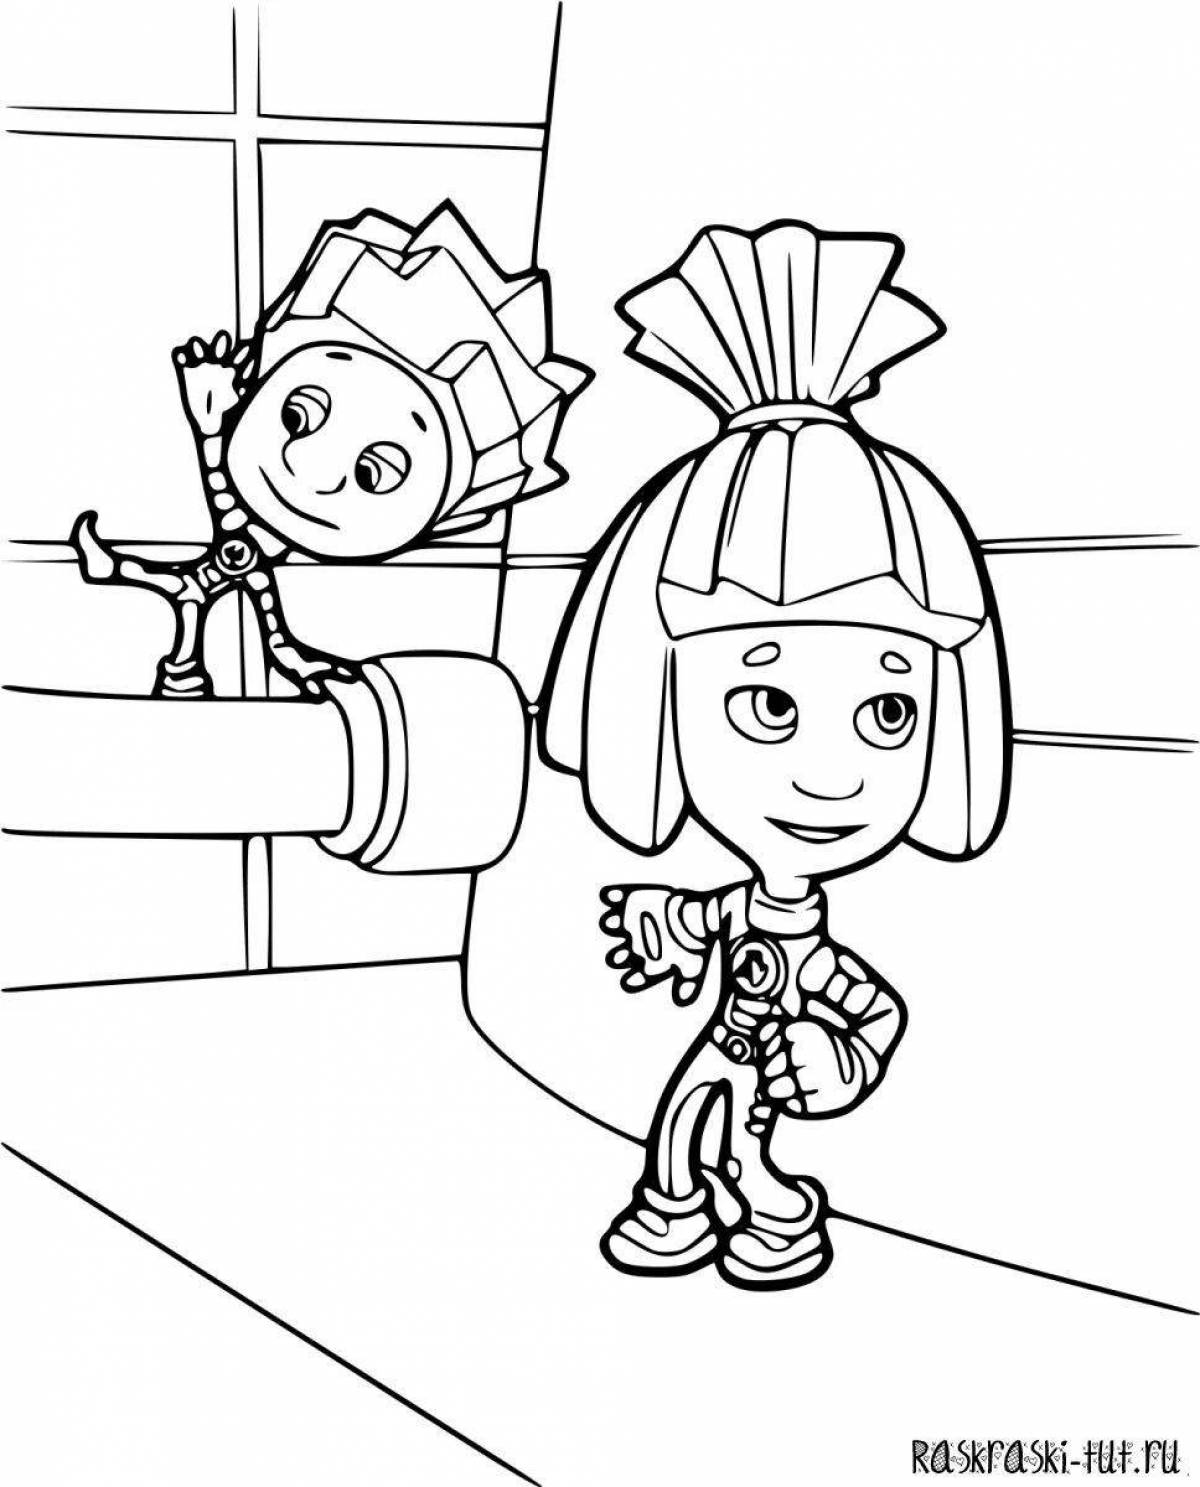 Live coloring pages for children 3-4 years old